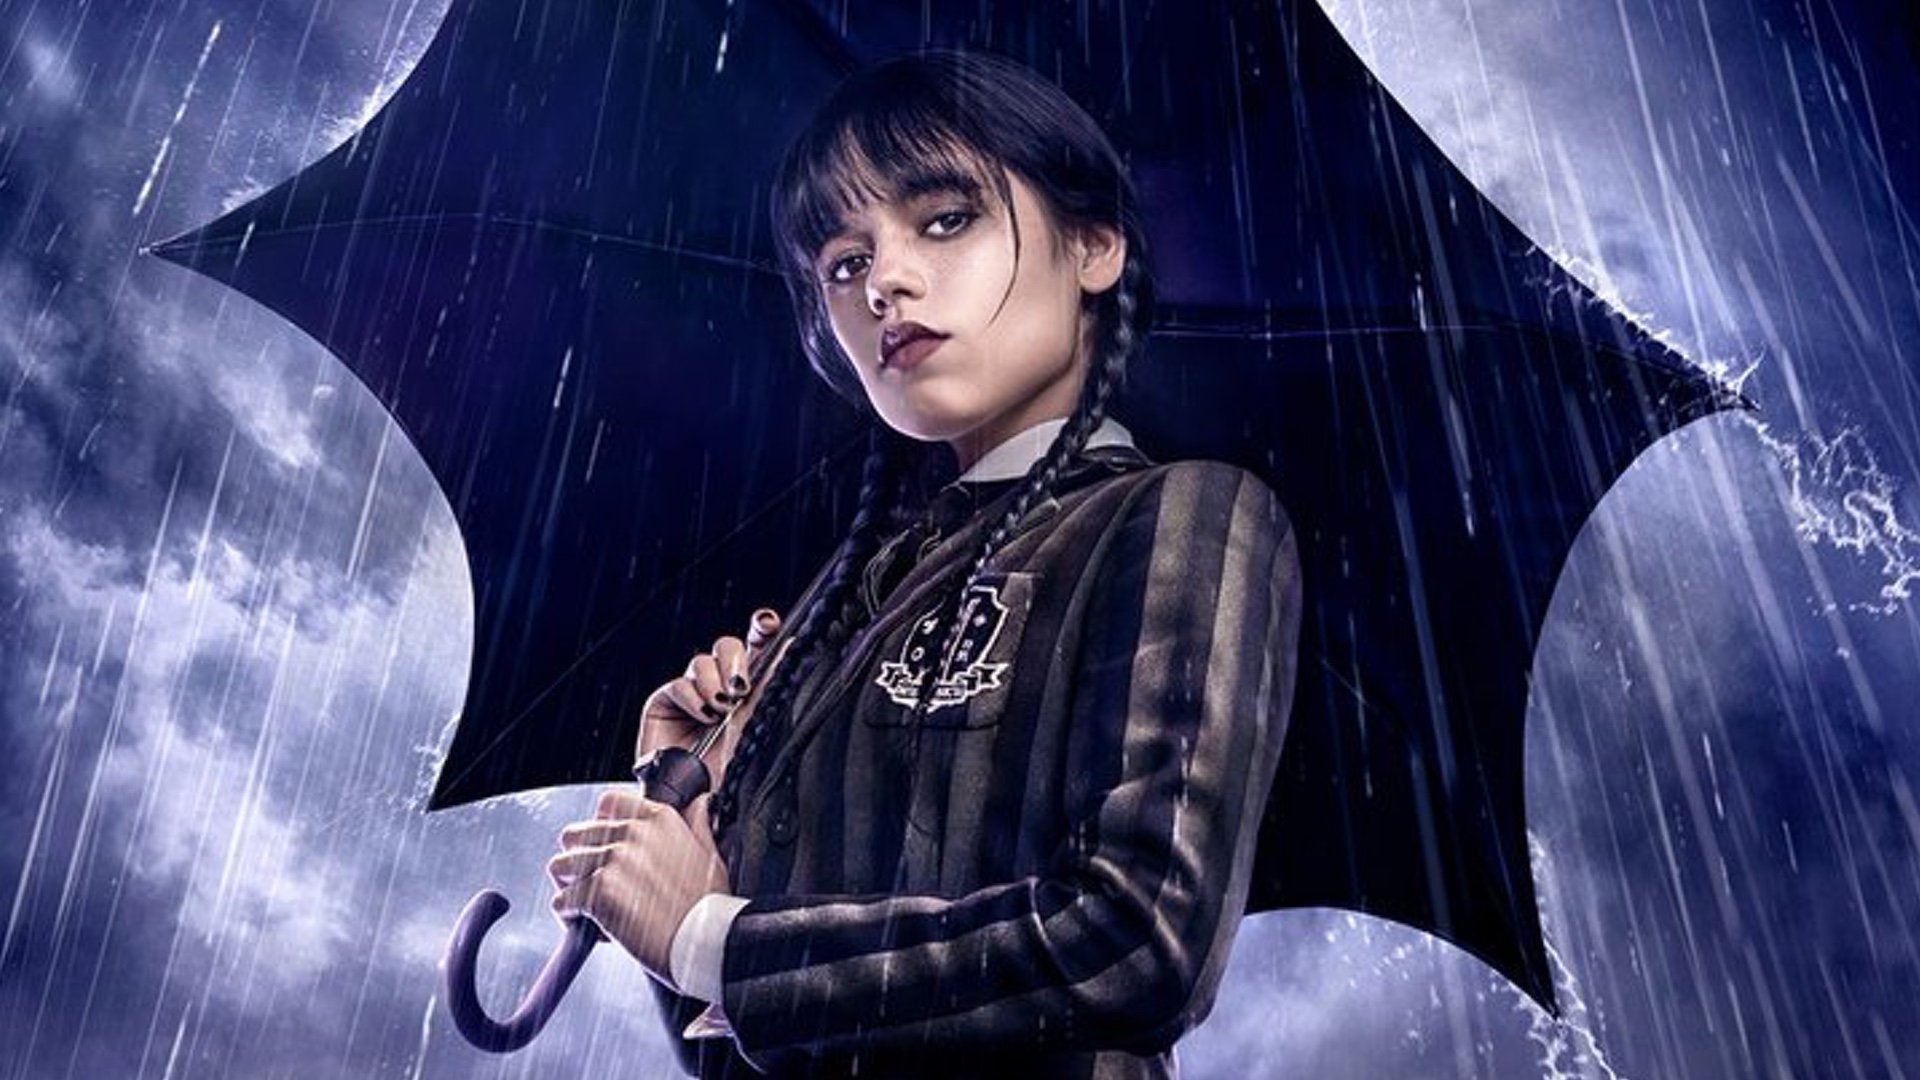 New Poster and Premiere Date for Tim Burton's WEDNESDAY